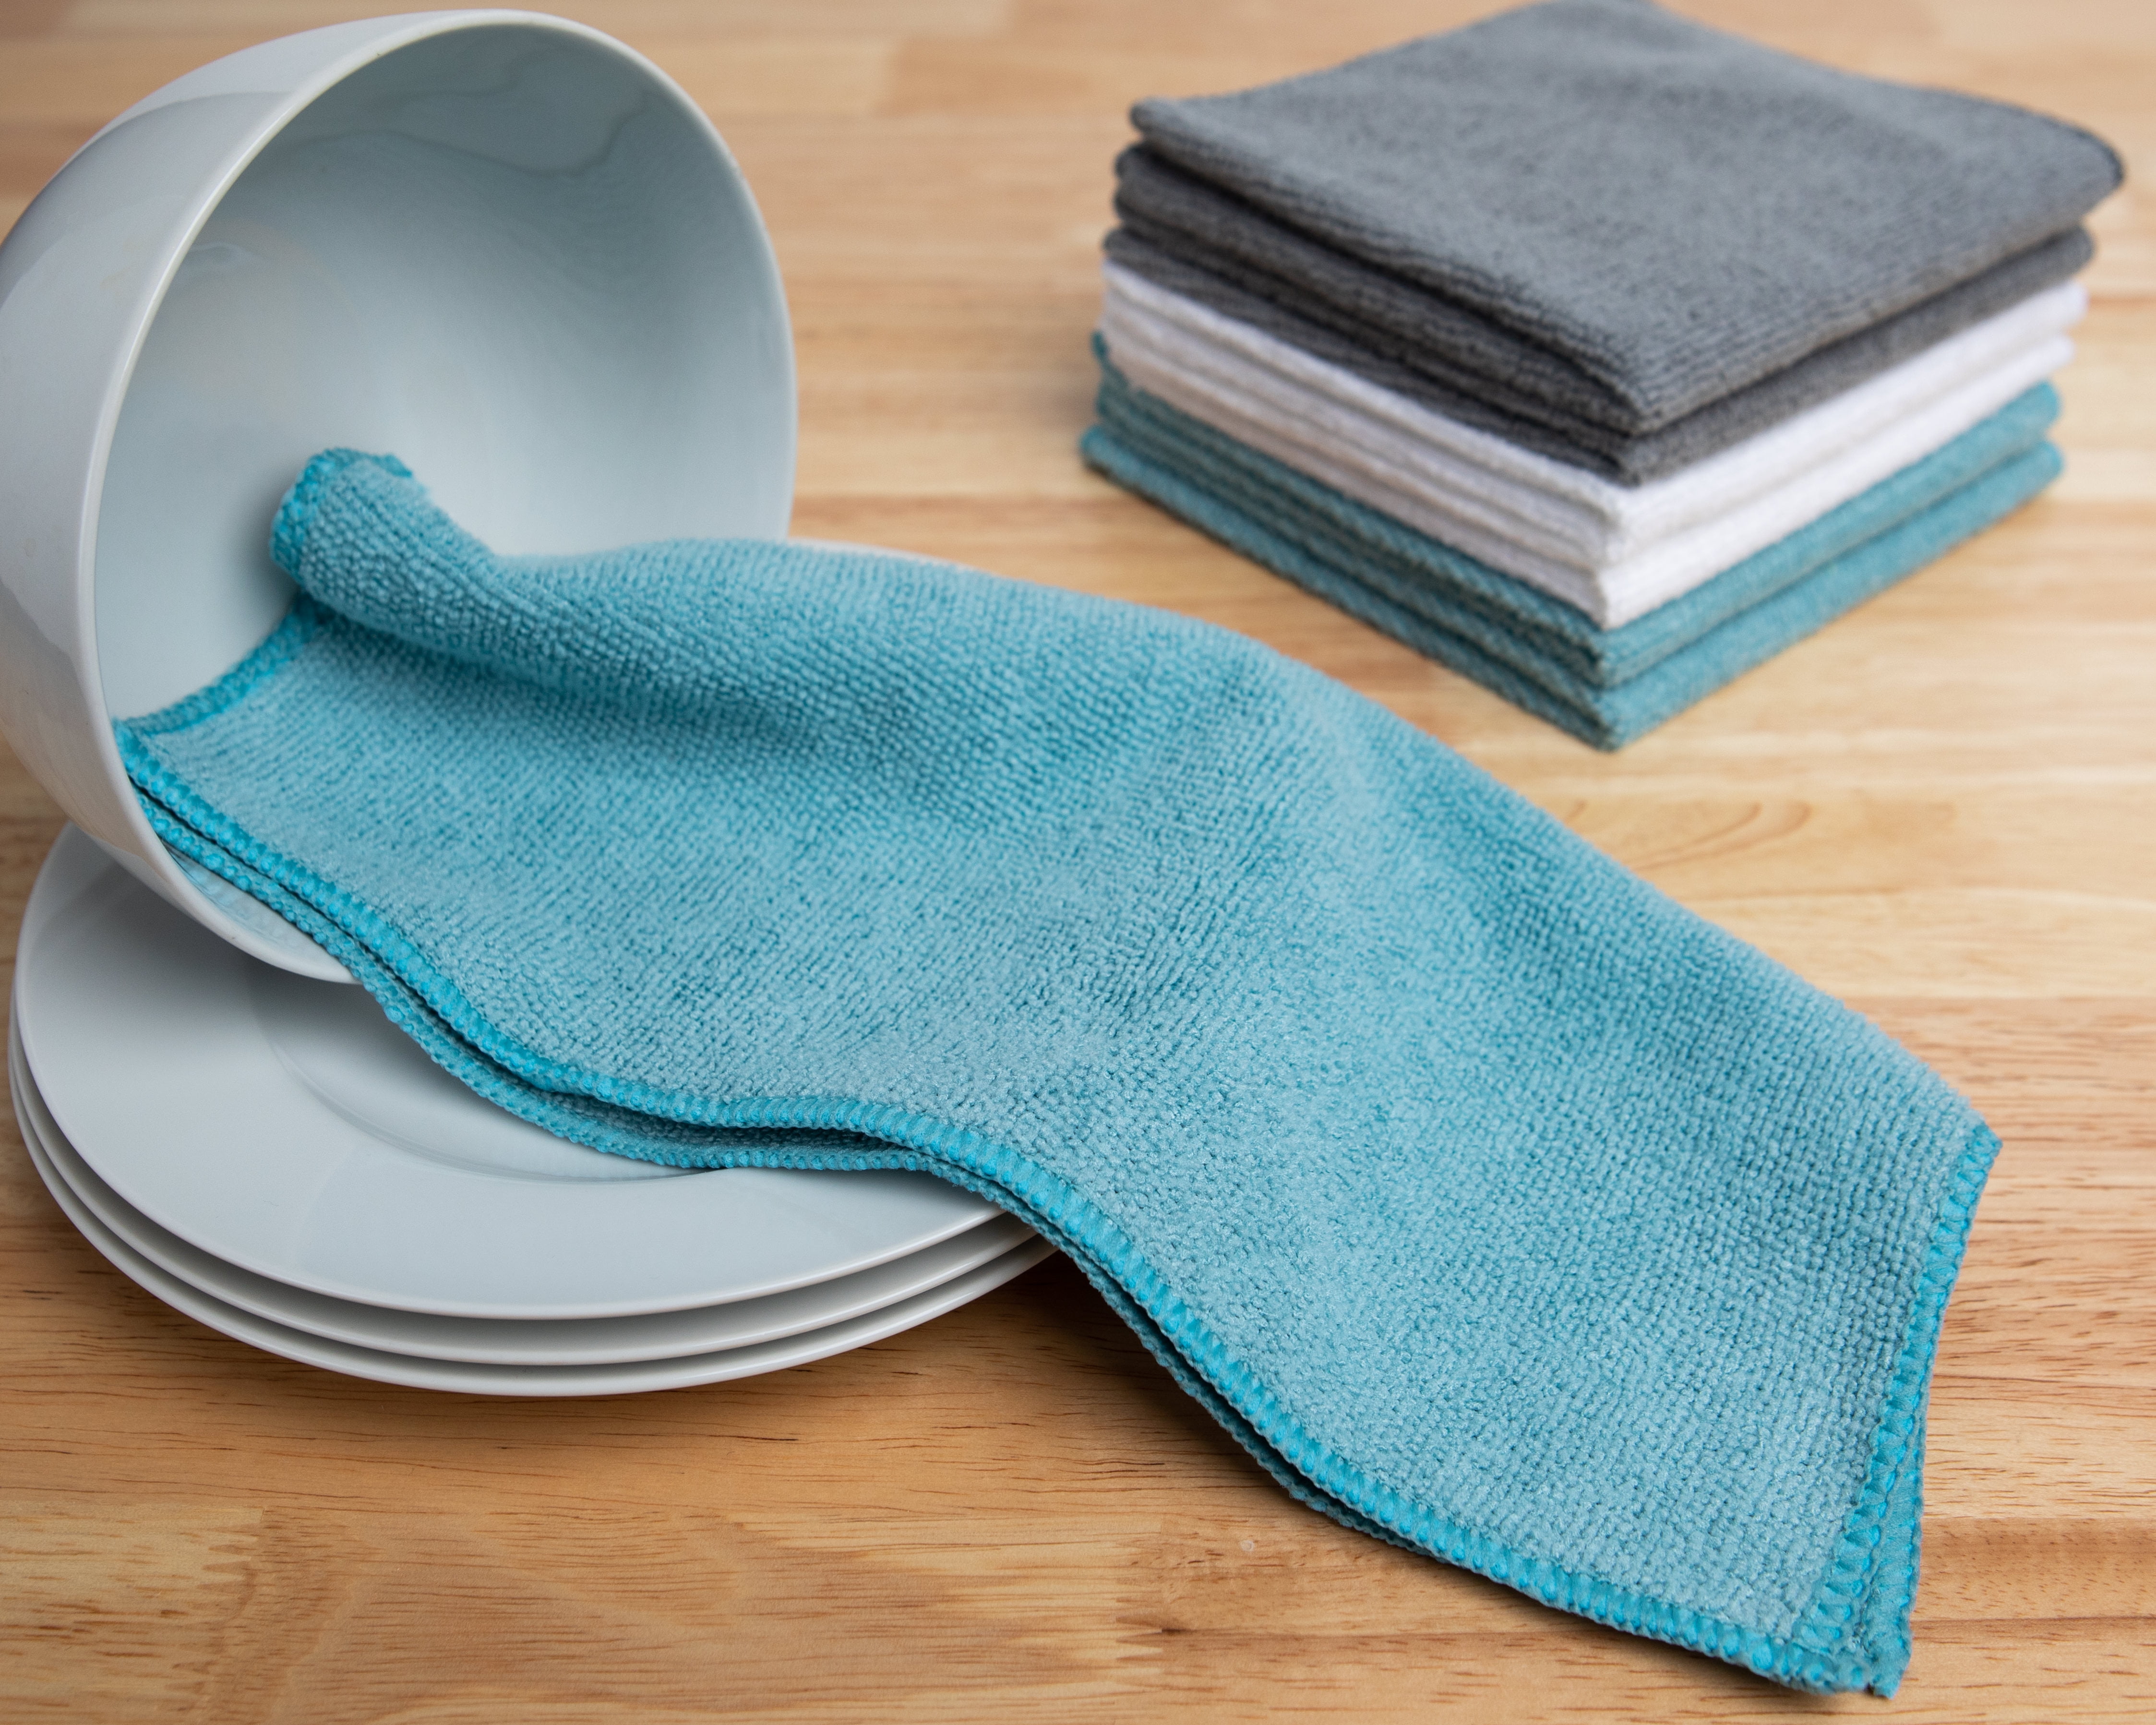  Natta Microfiber Kitchen Dish Cloths for Washing Dishes with  Poly Scour Side, Fast Dry no Odor wash Cloth with Scrubber Side, Dish Rags  with mesh Back. 12x12-4xTurquoise (Teal), 4xGray : Health